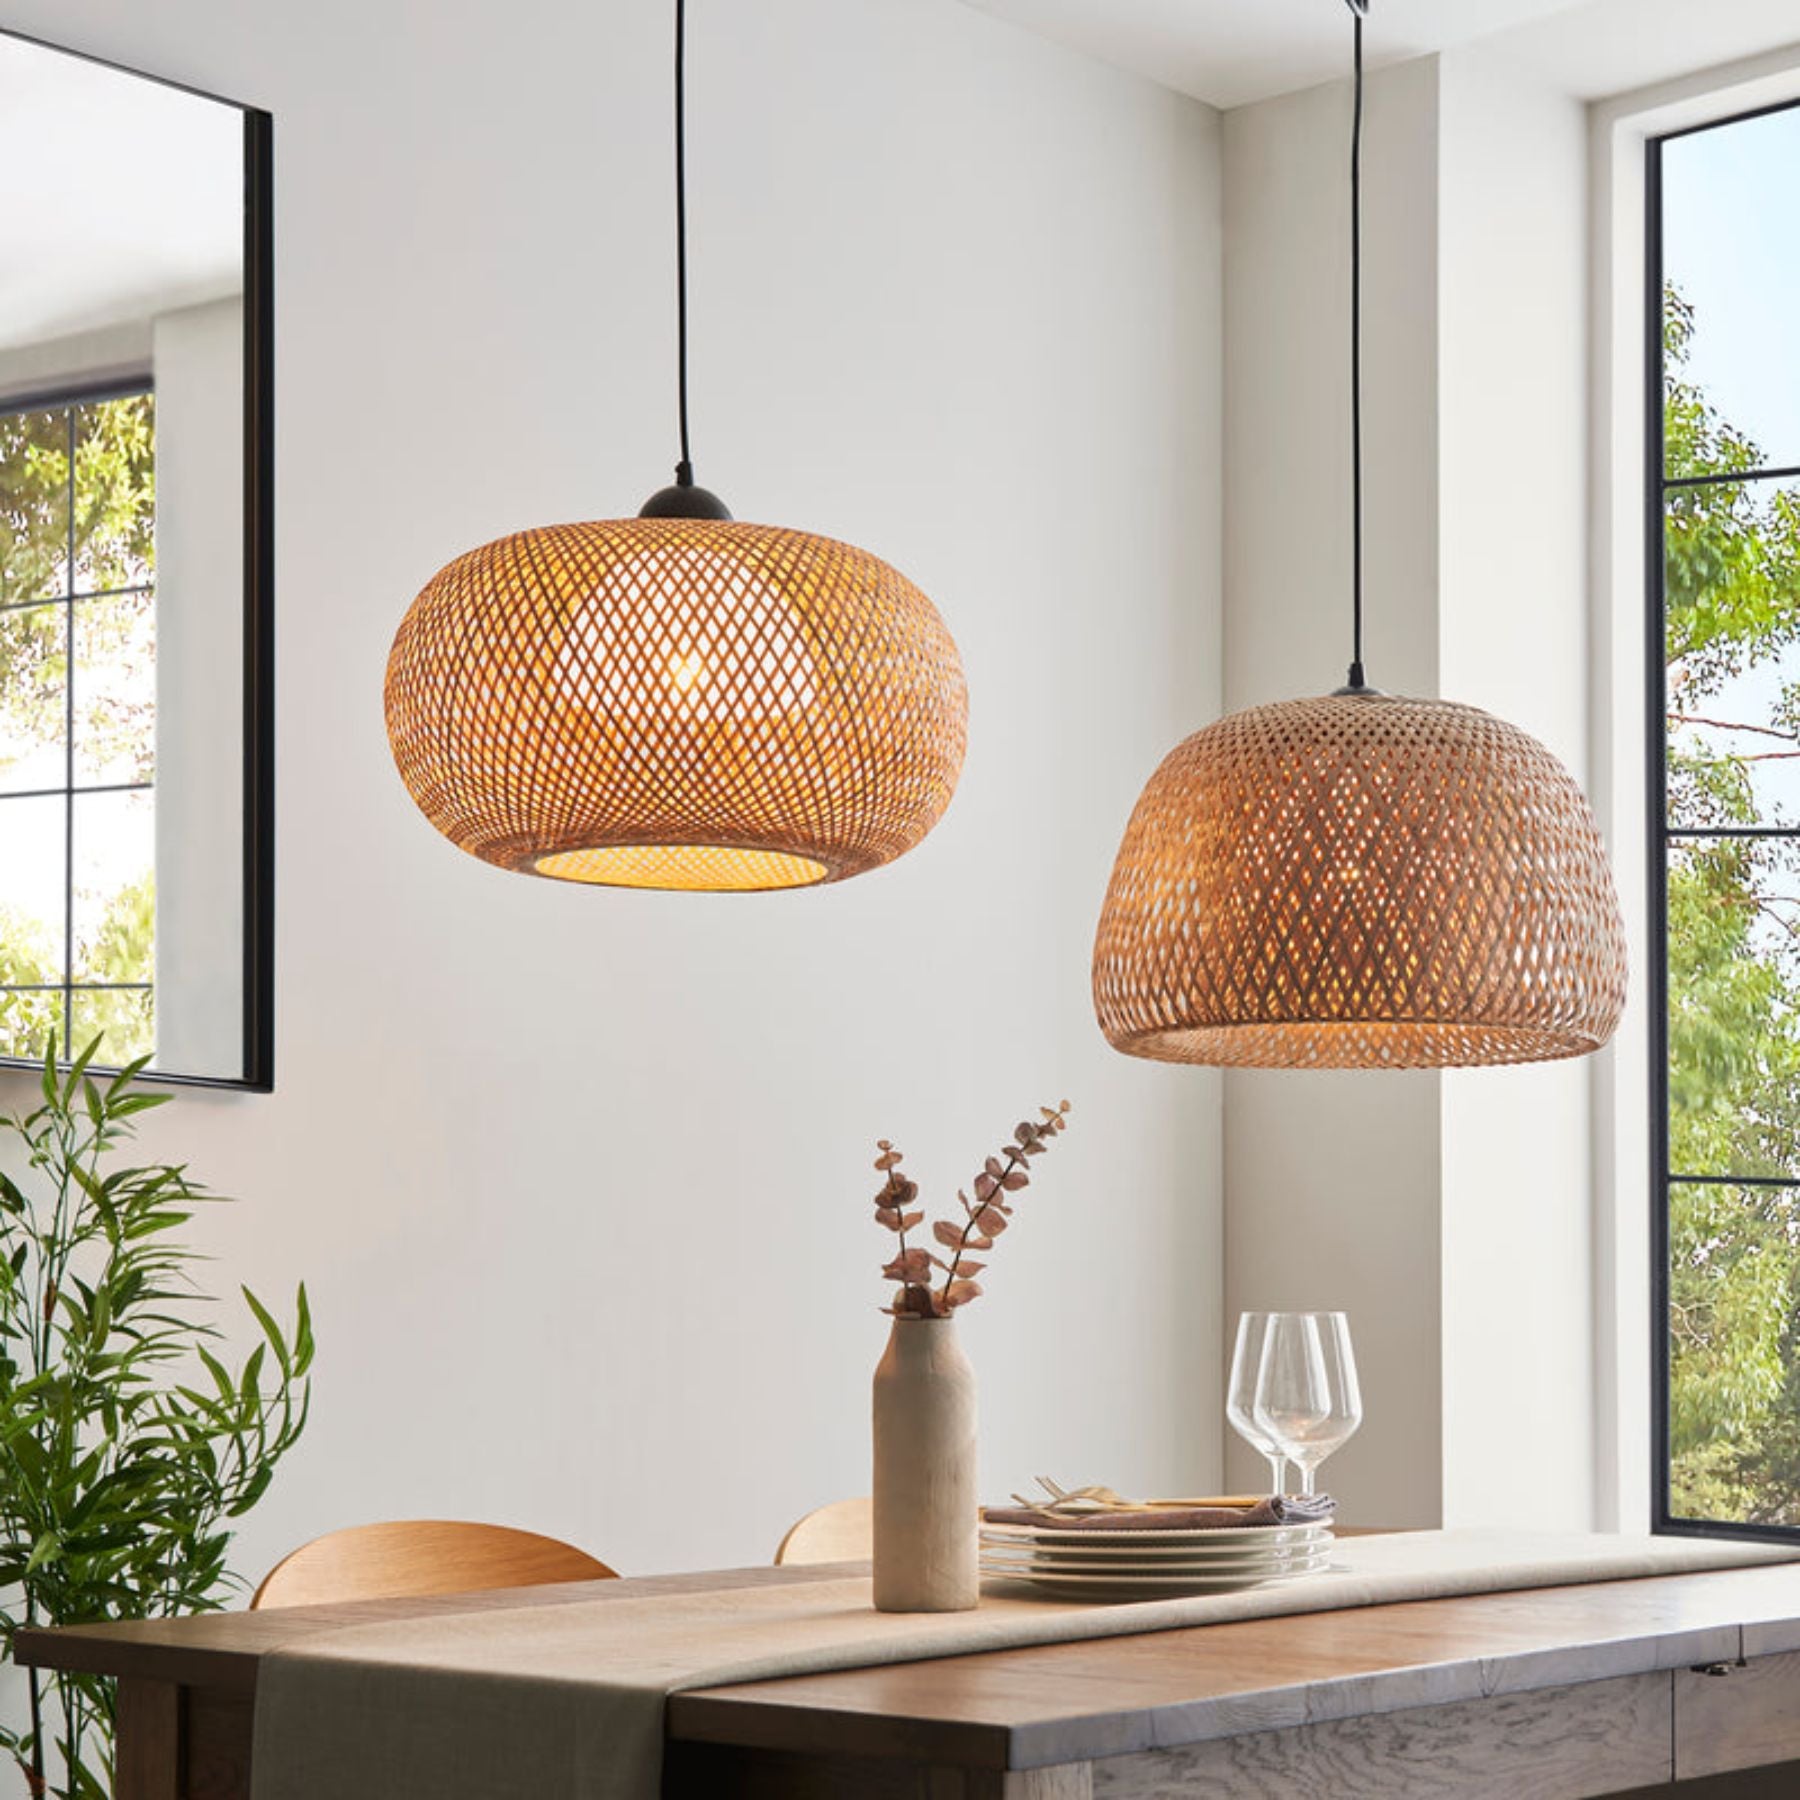 pendant lights seamlessly complement daylight creating a balanced and inviting atmosphere